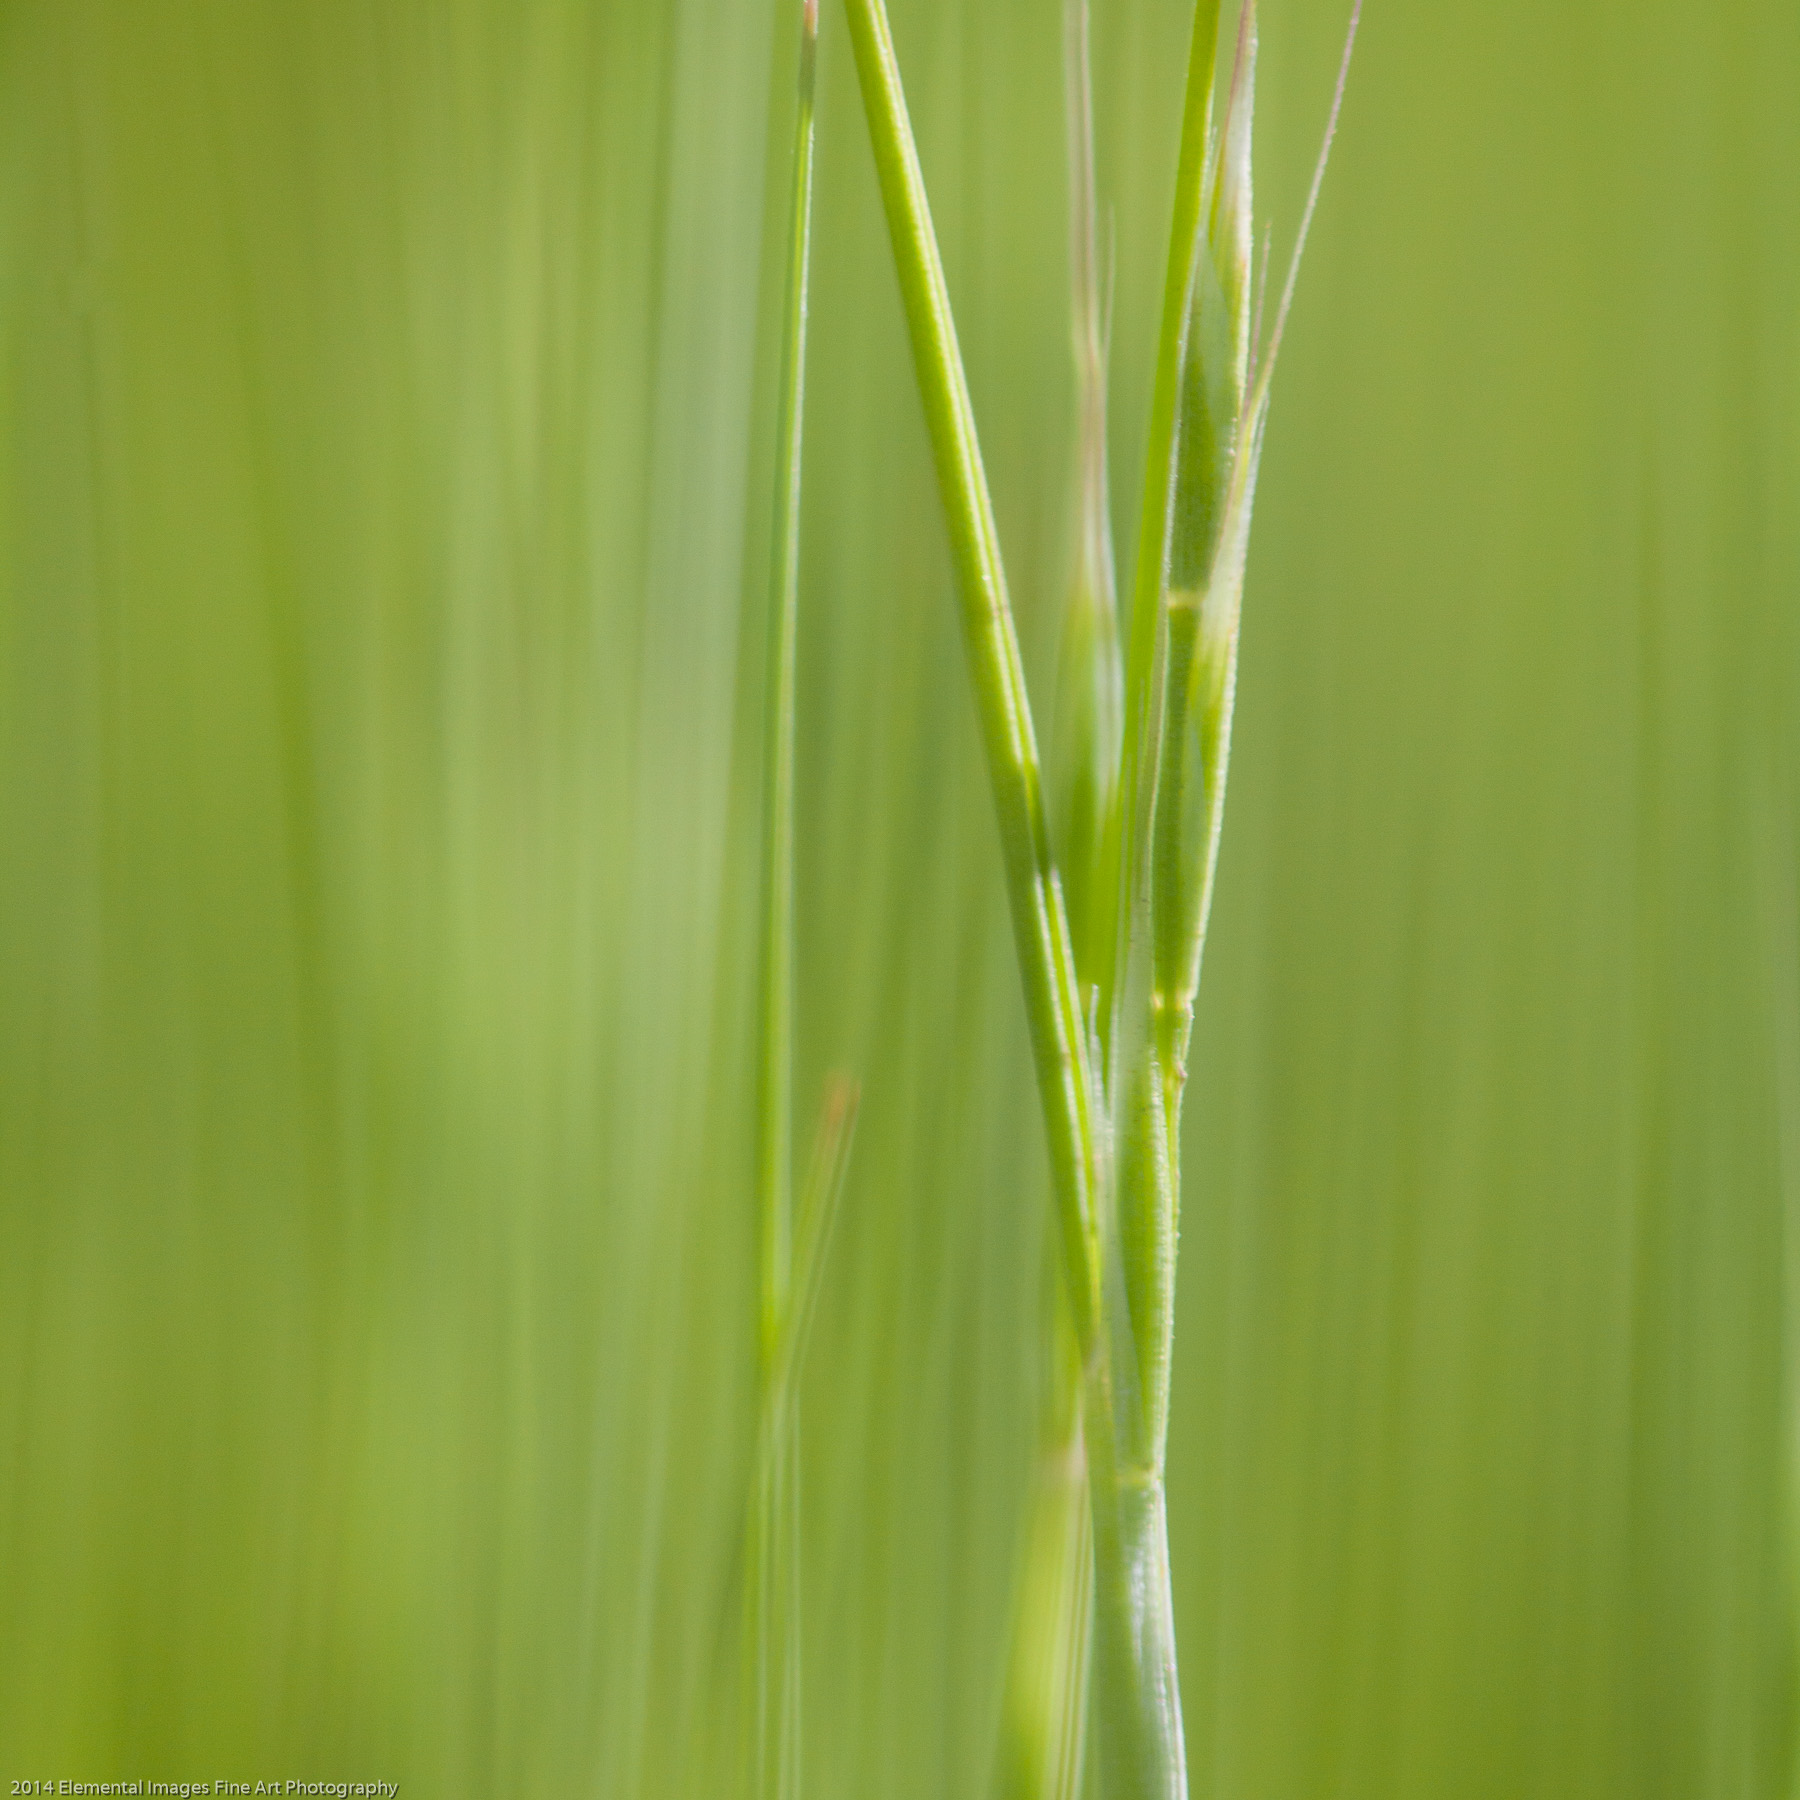 Grasses CXXXIV | The Palouse | WA | USA - © 2014 Elemental Images Fine Art Photography - All Rights Reserved Worldwide